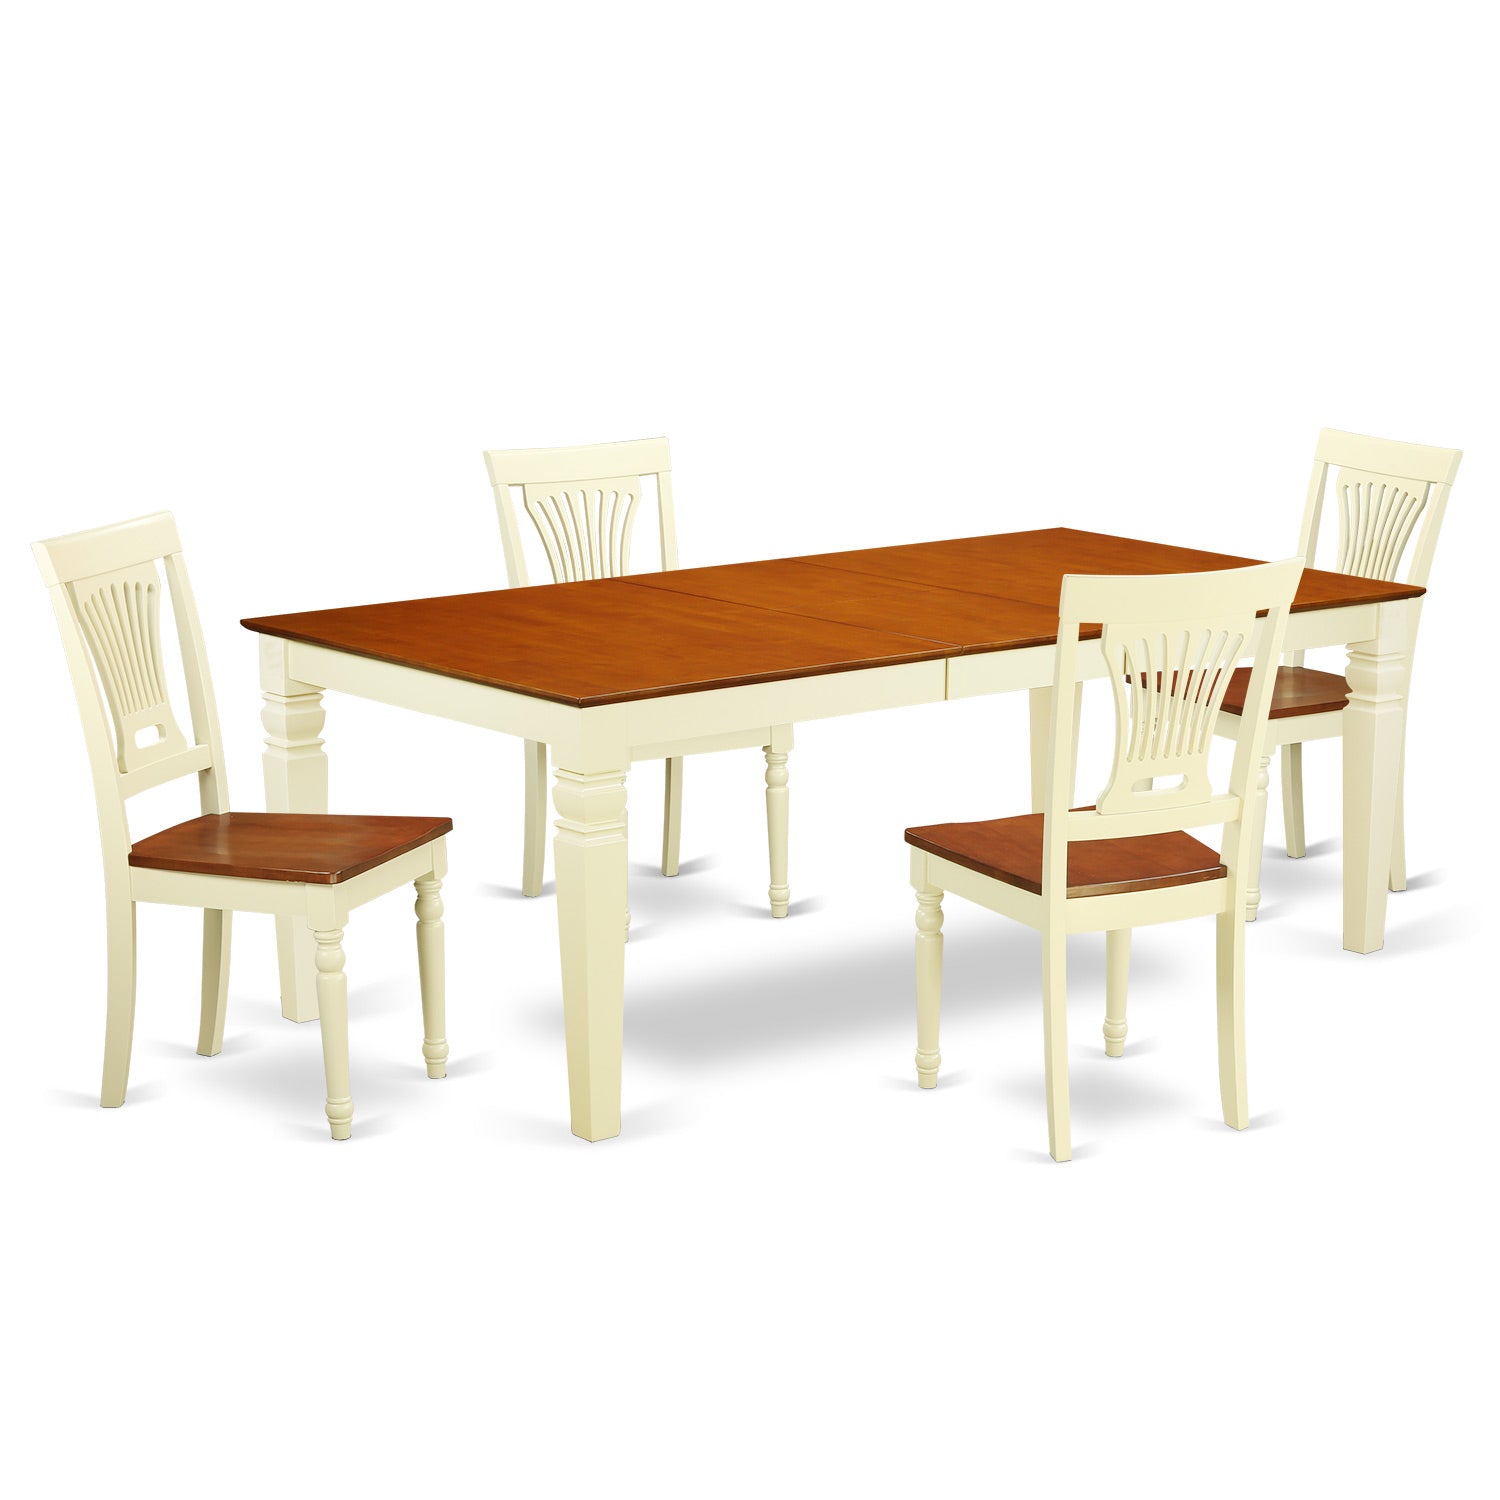 LGPL5-BMK-W 5 PC Dining room set with a Dining Table and 4 Dining Chairs in Buttermilk and Cherry